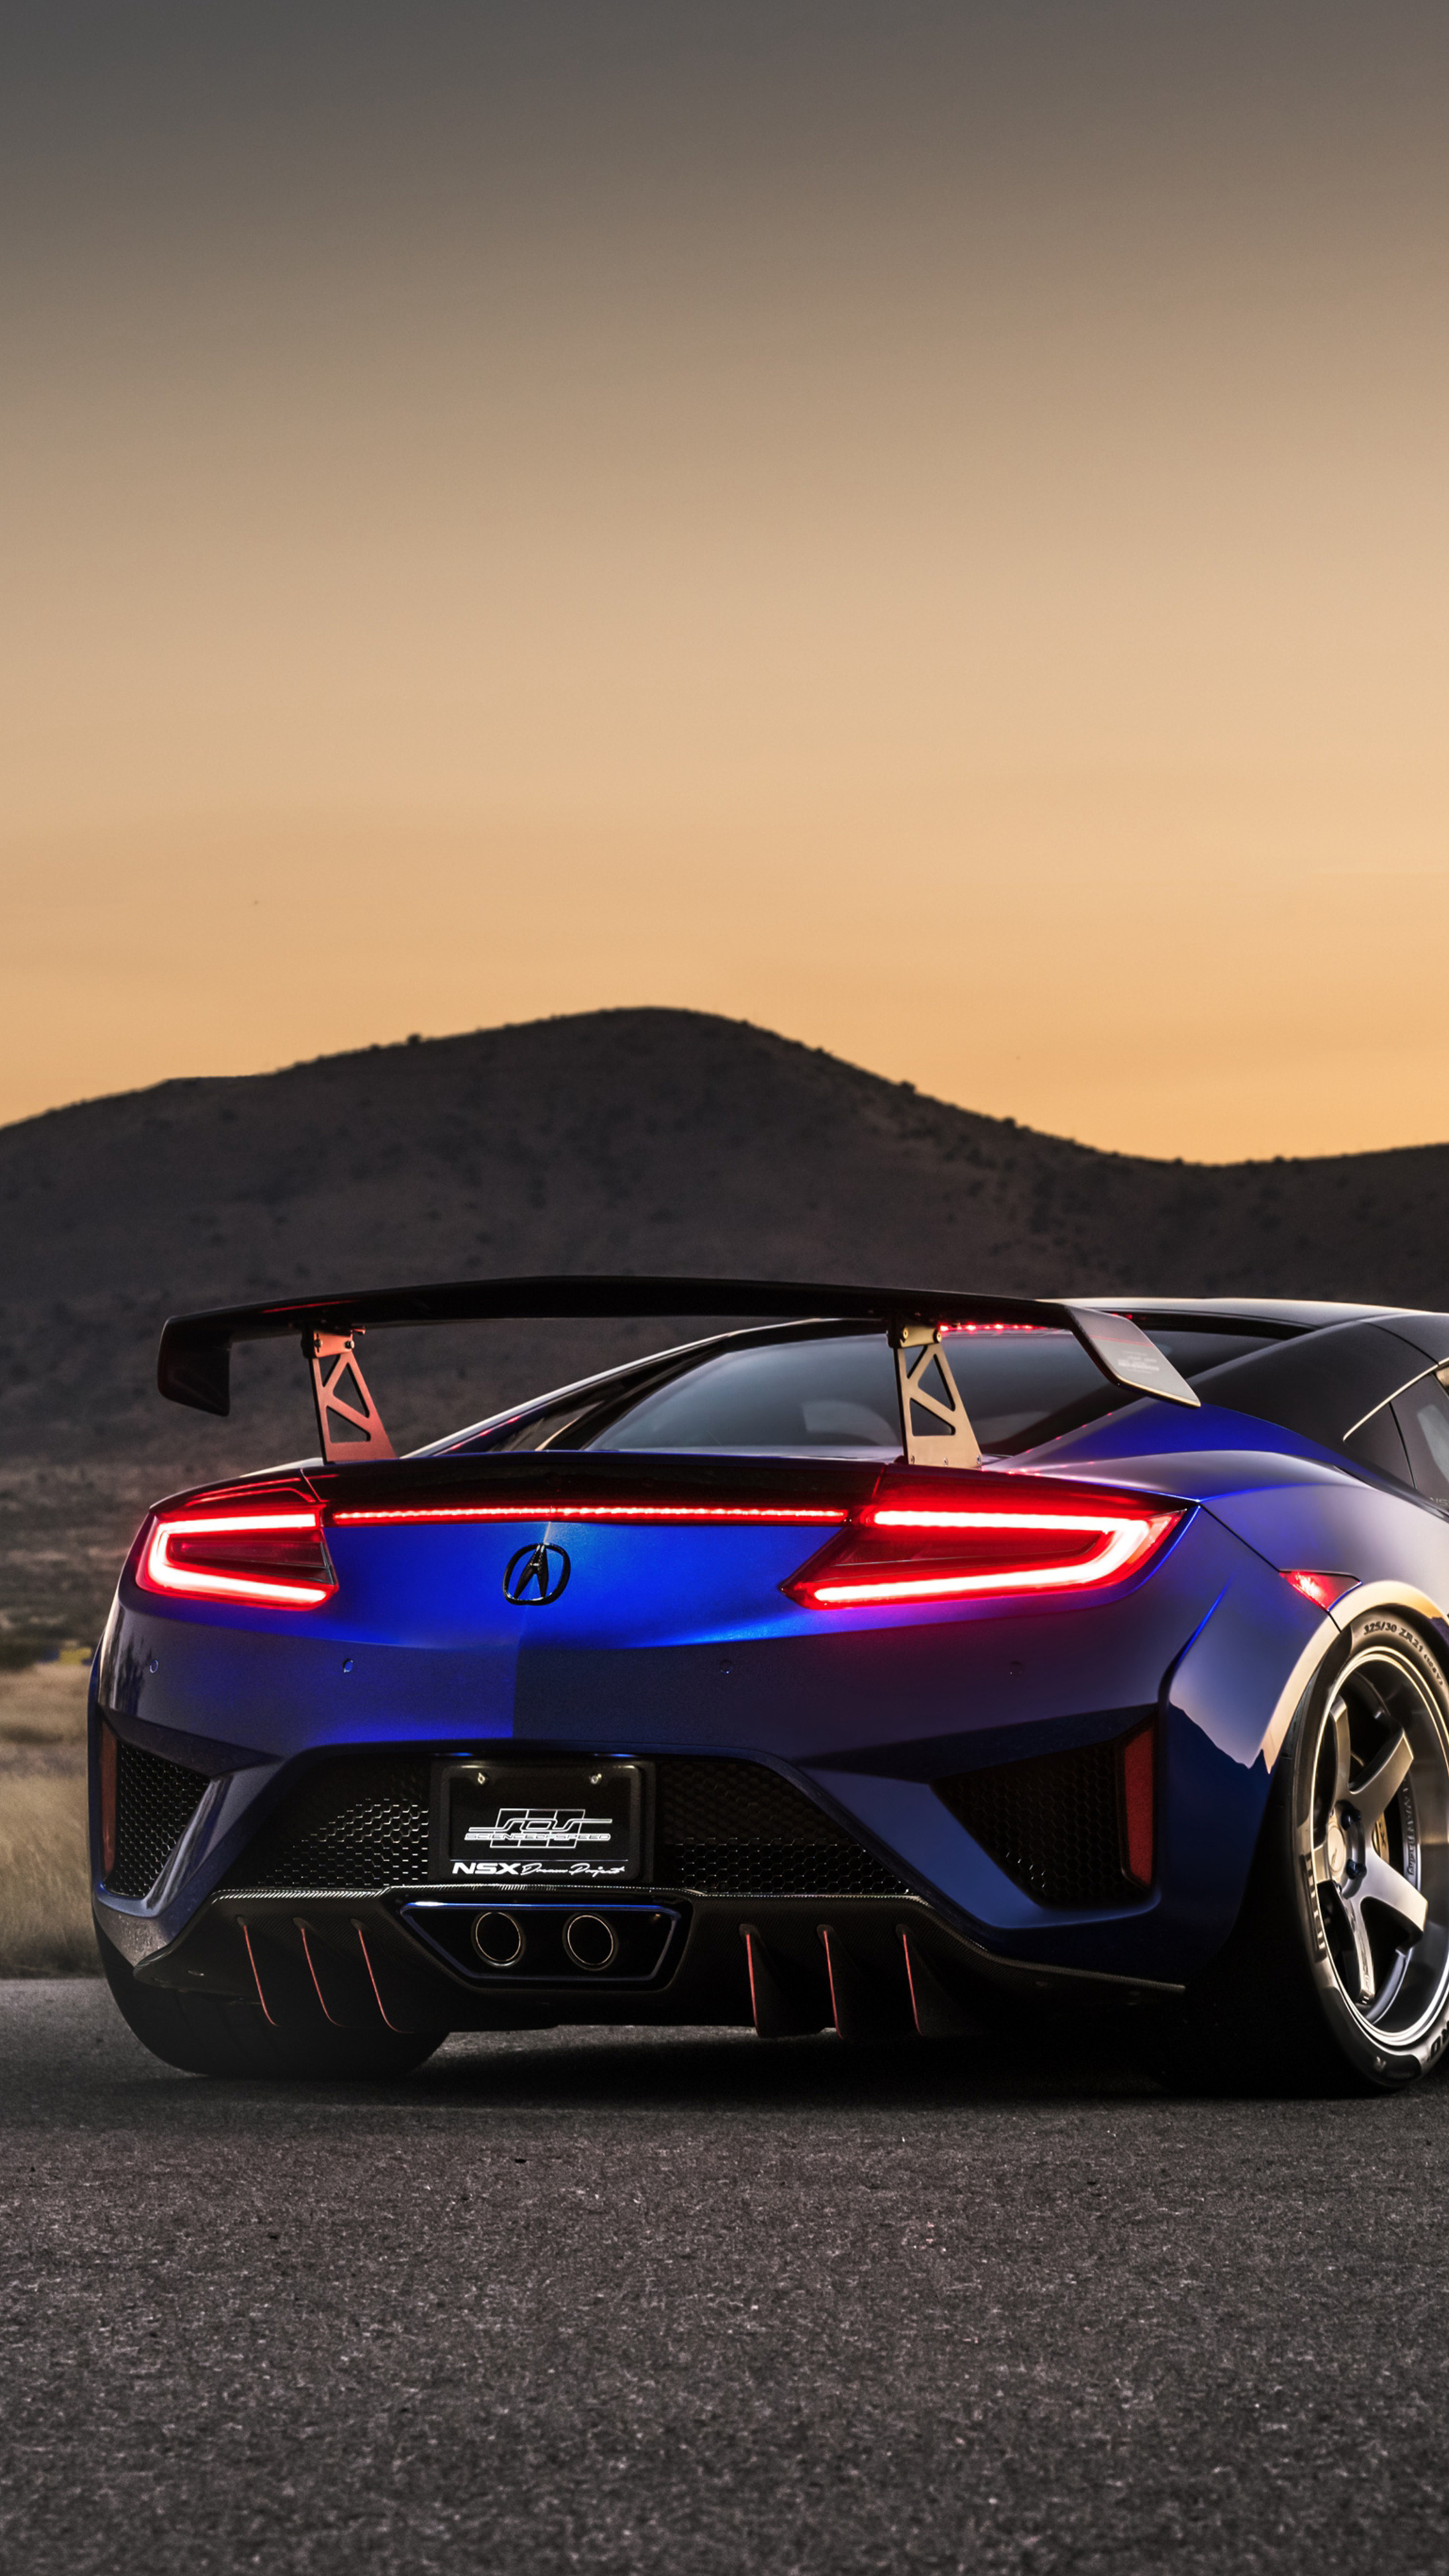 Acura NSX ScienceofSpeed Dream Project, Premium HD 4K wallpapers, Xperia X, 2160x3840 4K Handy